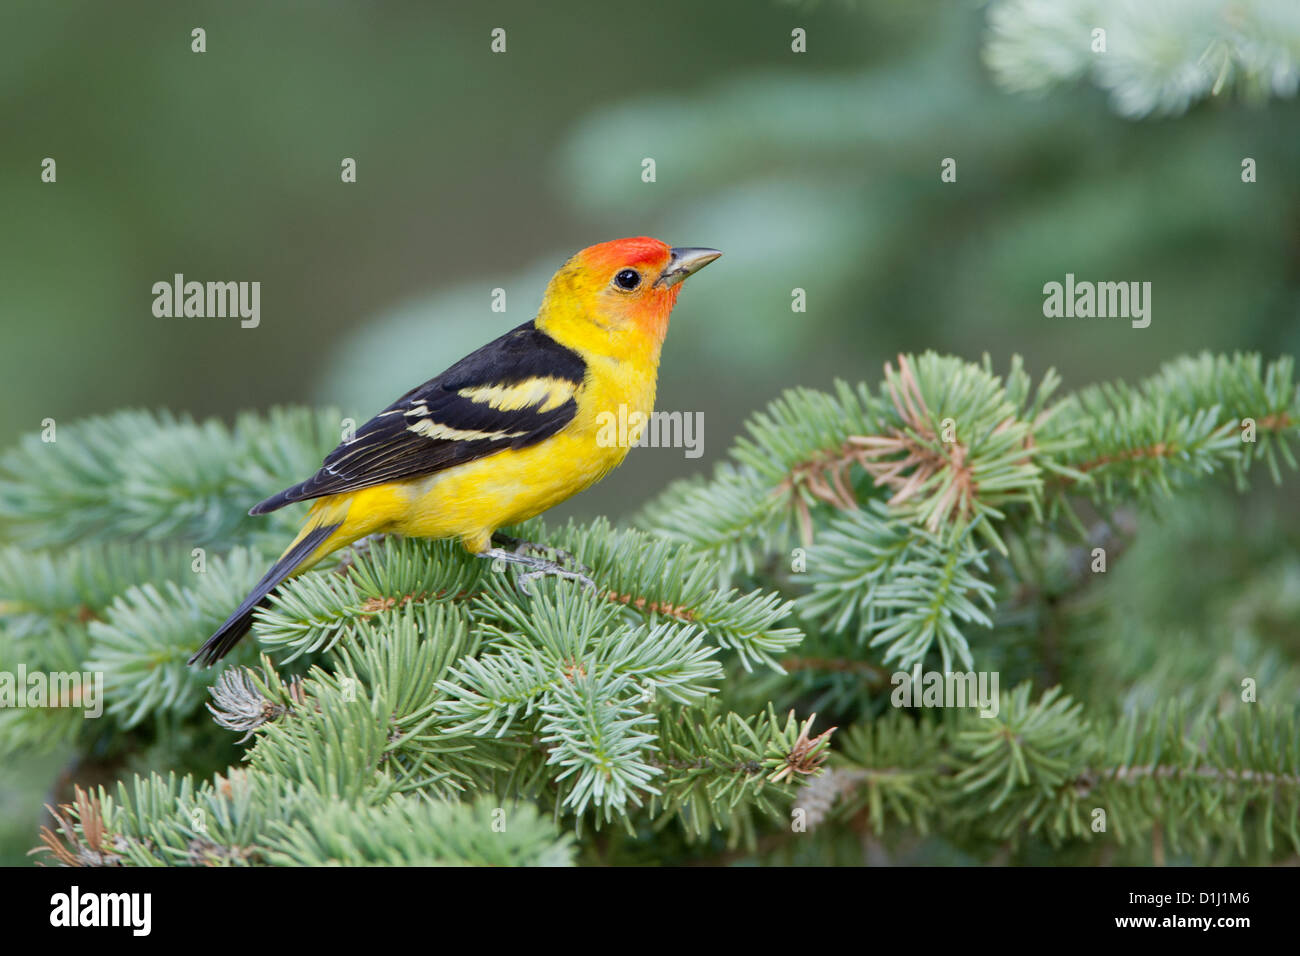 Western Tanager perched in Spruce birds bird songbird songbirds Ornithology Science Nature Wildlife Environment tanagers Stock Photo